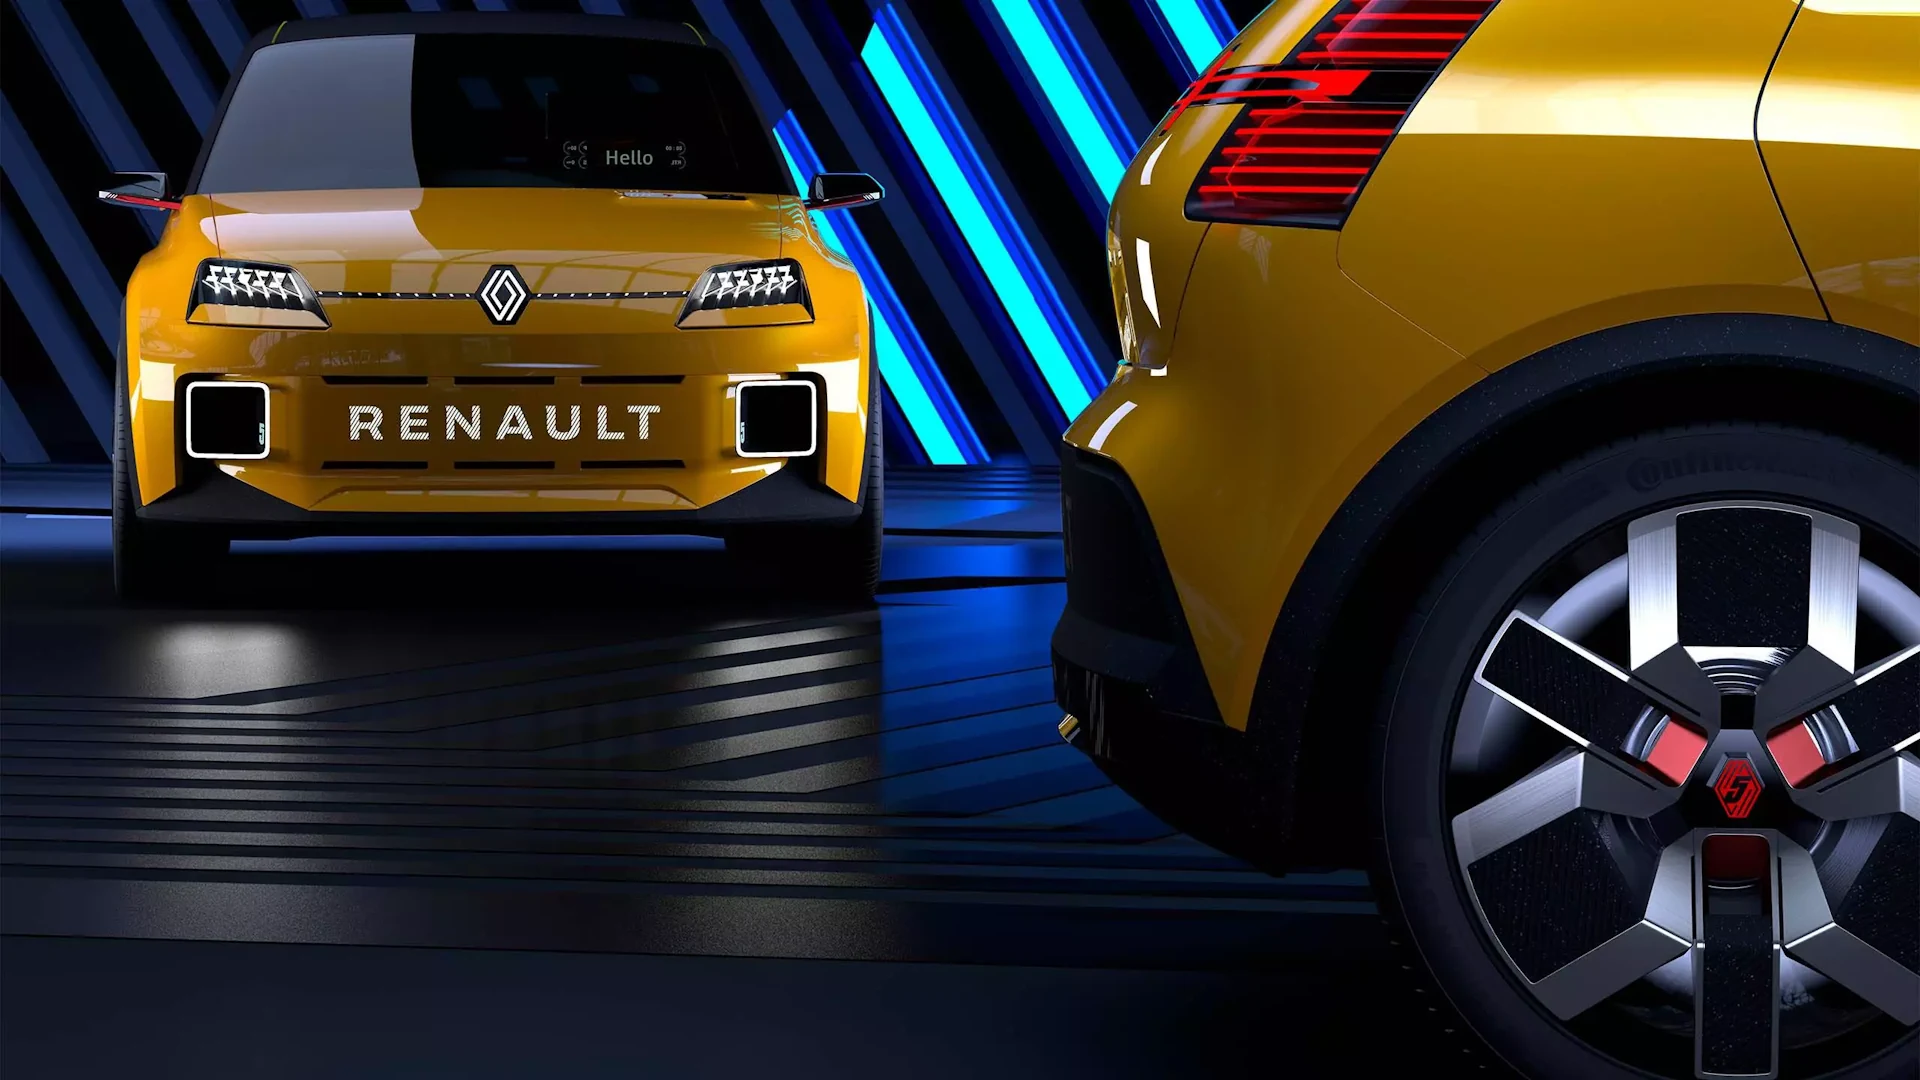 Renault is about to introduce a supposedly more affordable electric city car